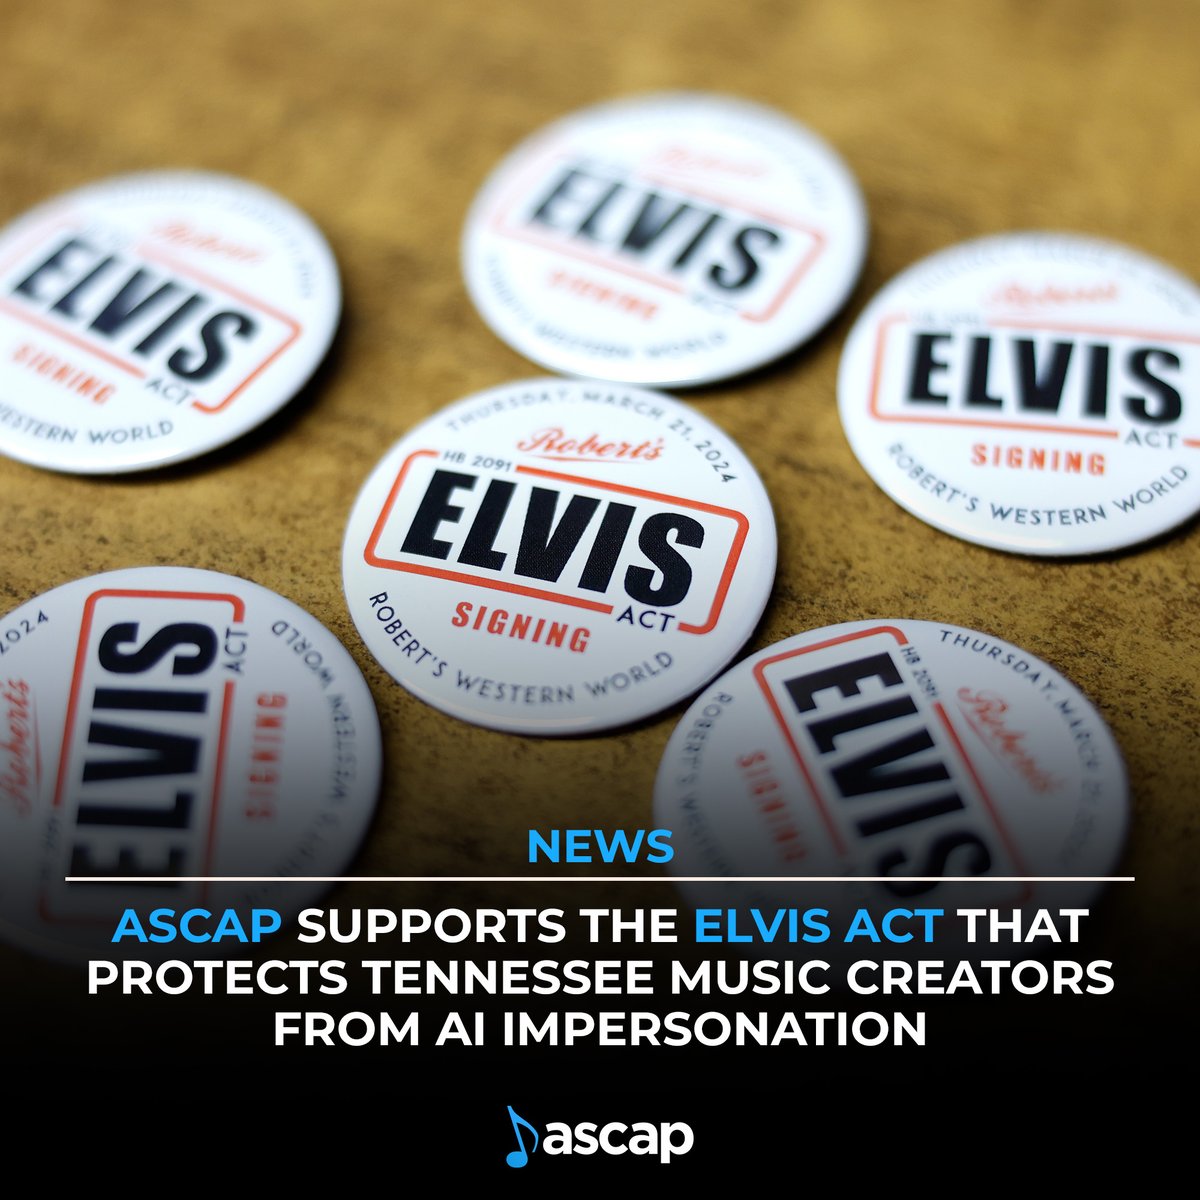 Tennessee is the first state to enact a law that protects musicians’ voices from unauthorized imitation by AI. We are proud to stand with so many ASCAP members who tirelessly advocated for the ELVIS Act. Learn more: bit.ly/4ag9WNY